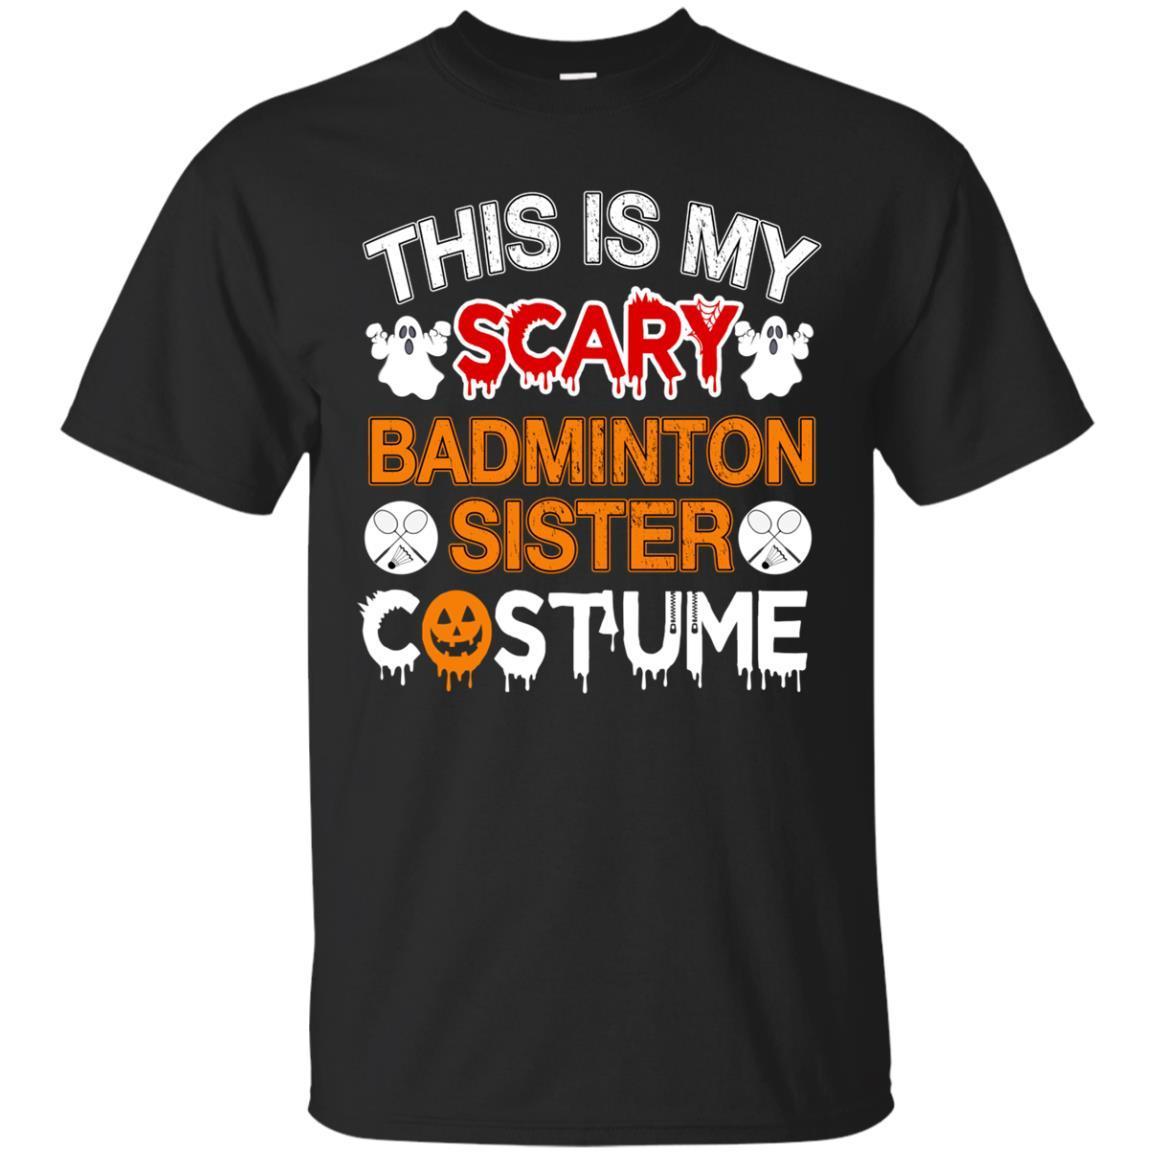 This Is My Scary Badminton Sister Costume Halloween Shirt